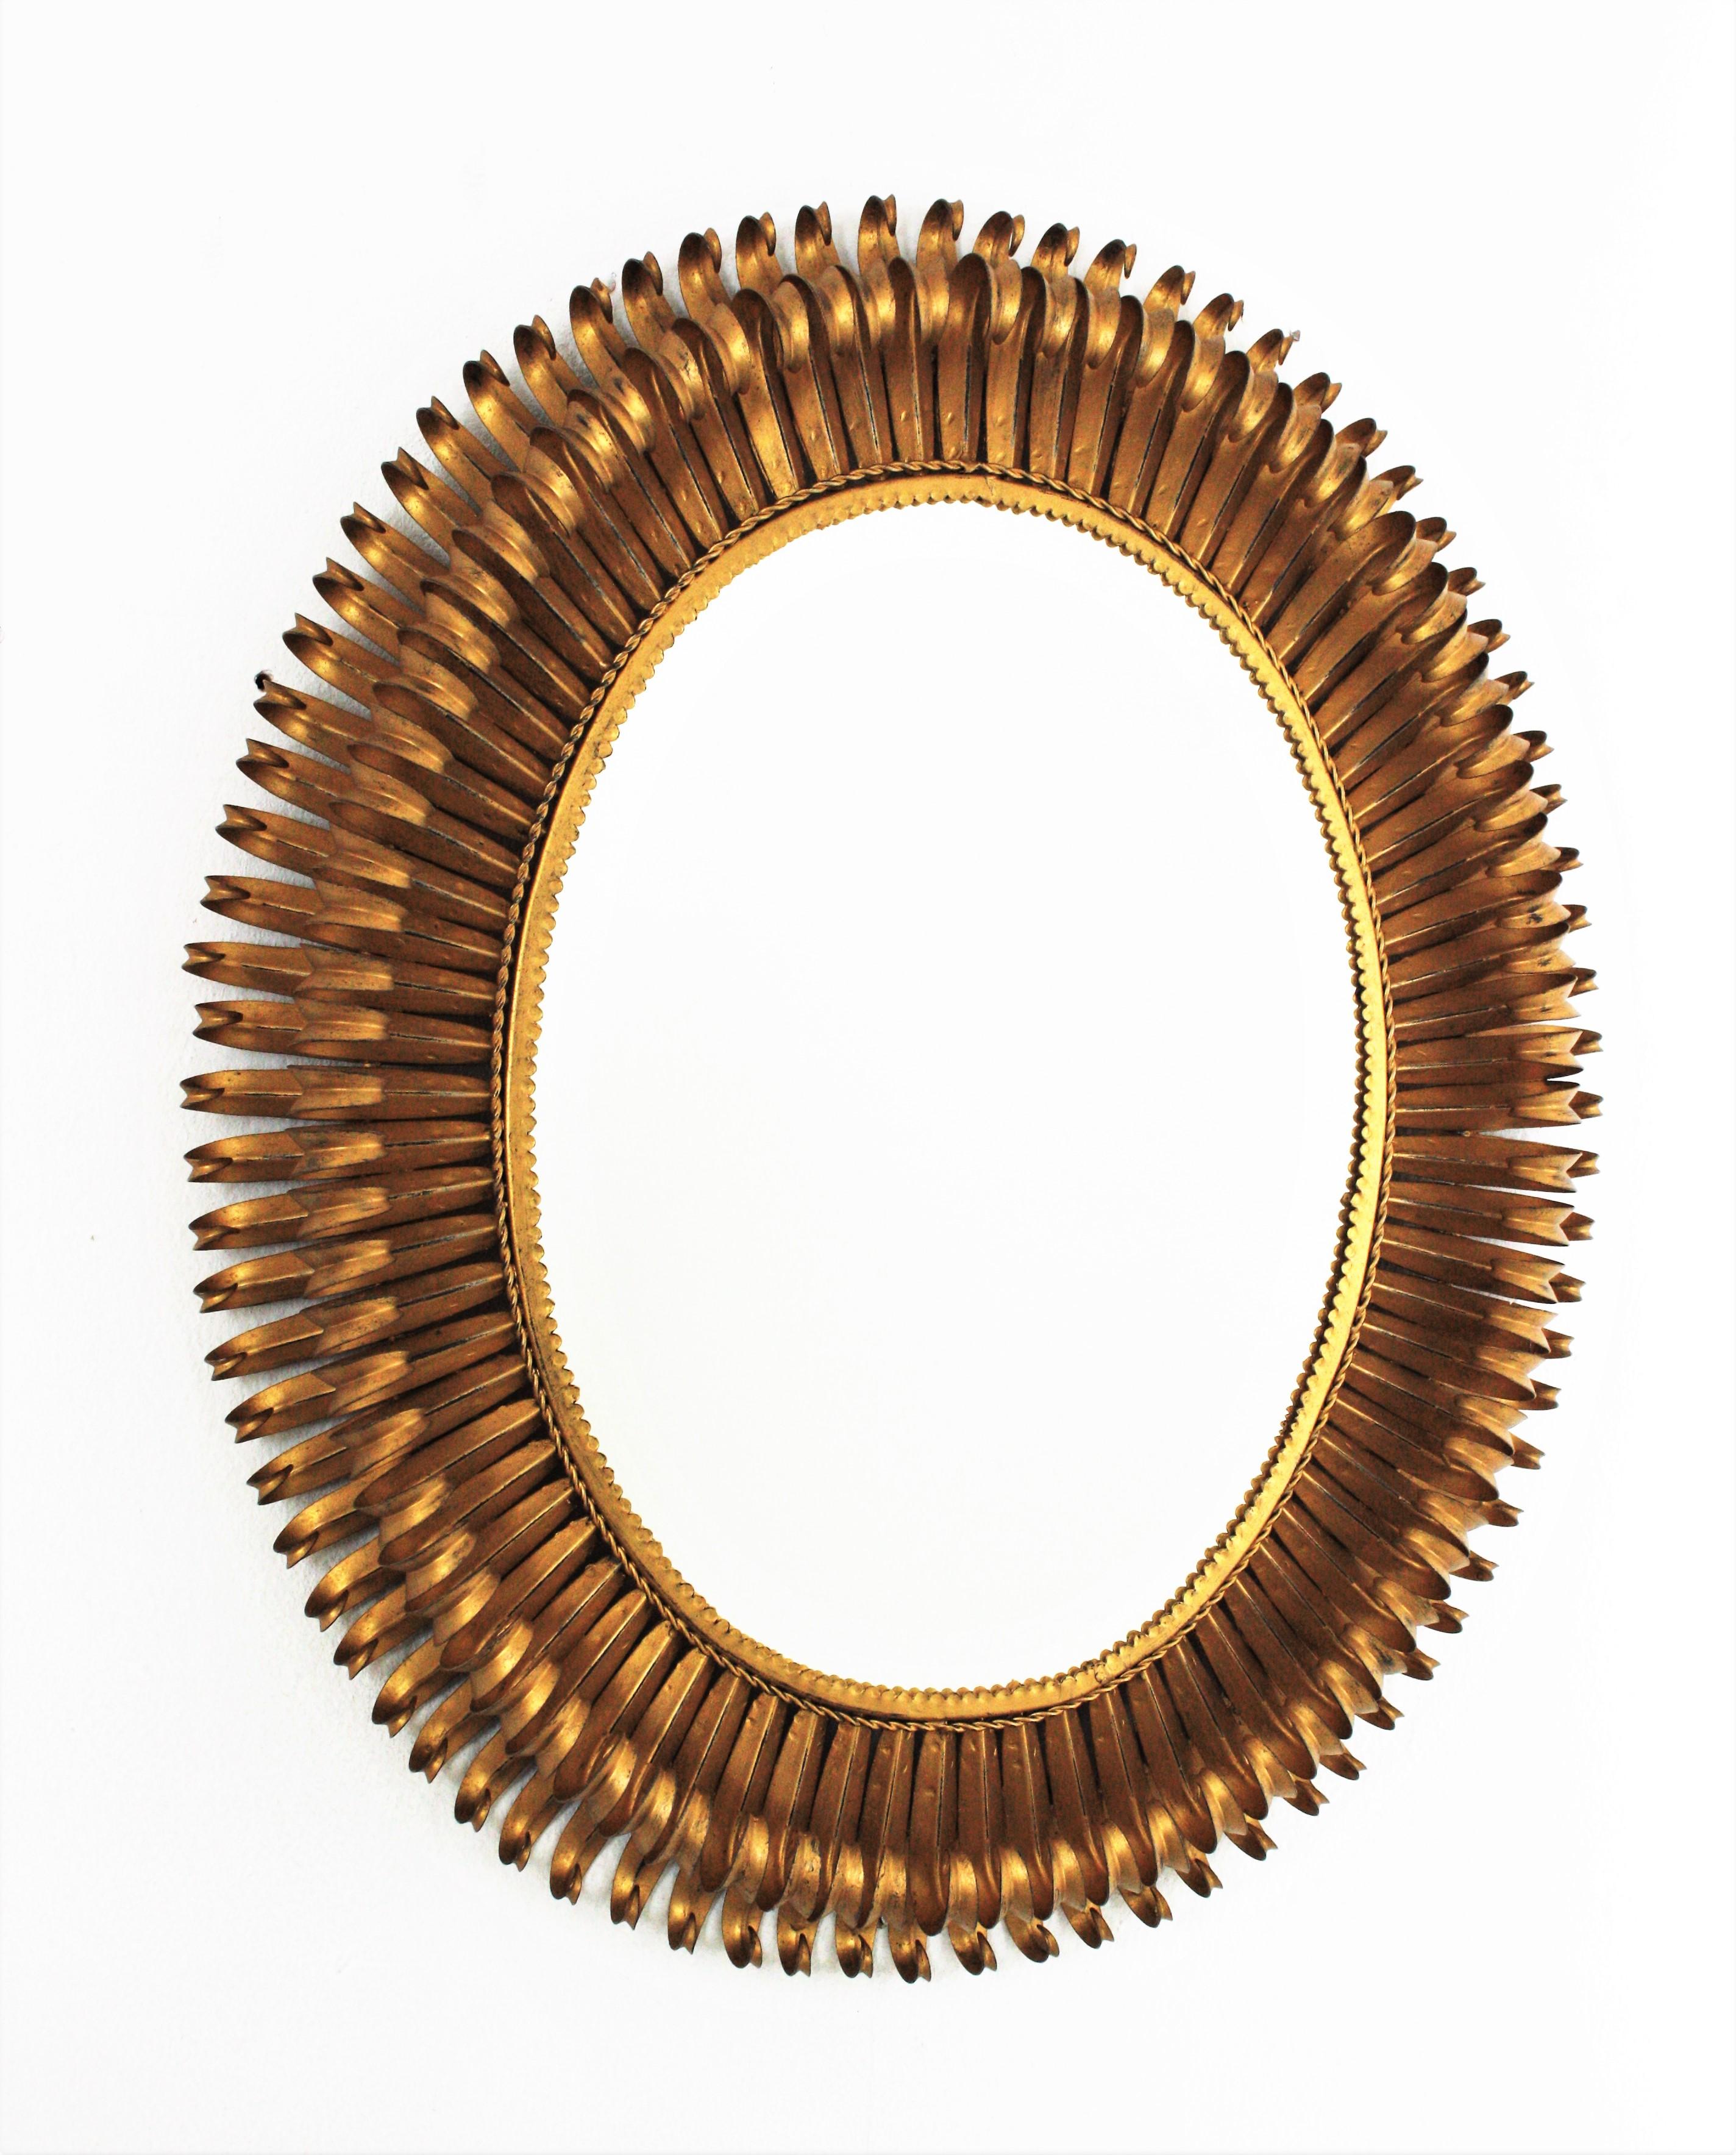 Eye-catching double layered eyelash gilt iron large sunburst mirror, France, 1950s
The frame is made by a double layer of curved beams in eyelash shape.
It will be a nice midcentury addition wherever you place it. Beautiful alone but gorgeous as a